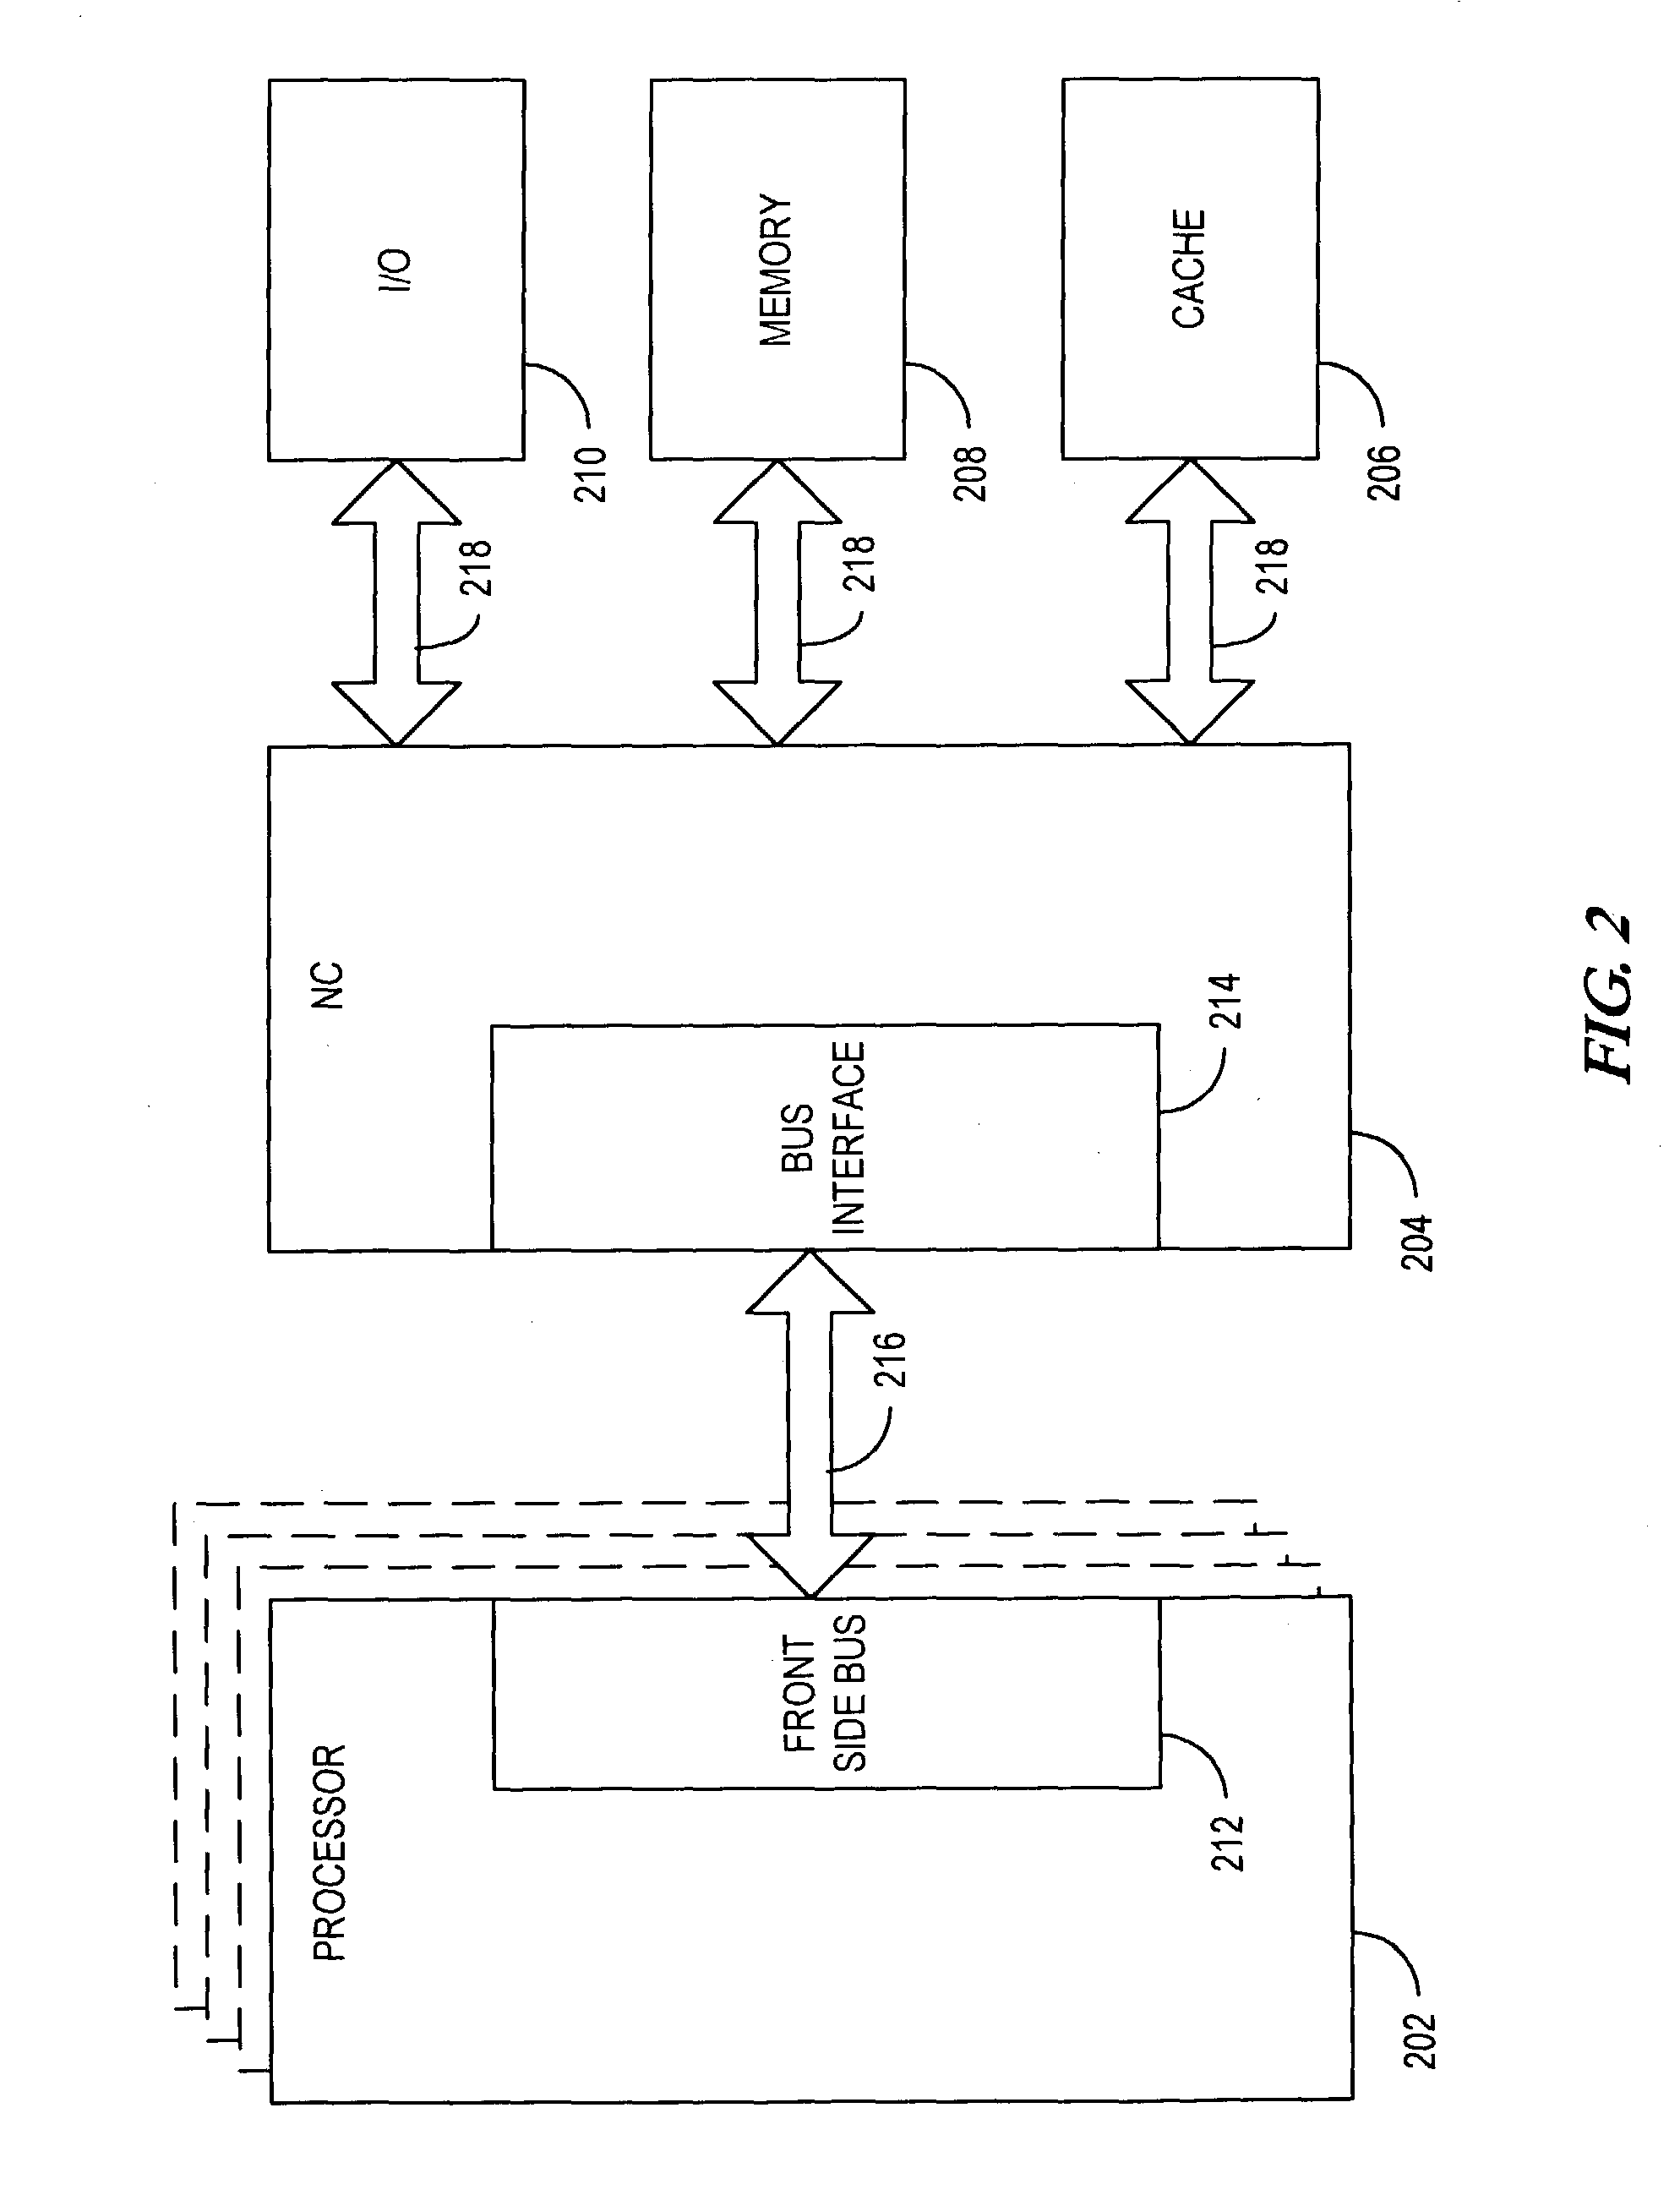 Method and apparatus for spawning multiple requests from a single entry of a queue